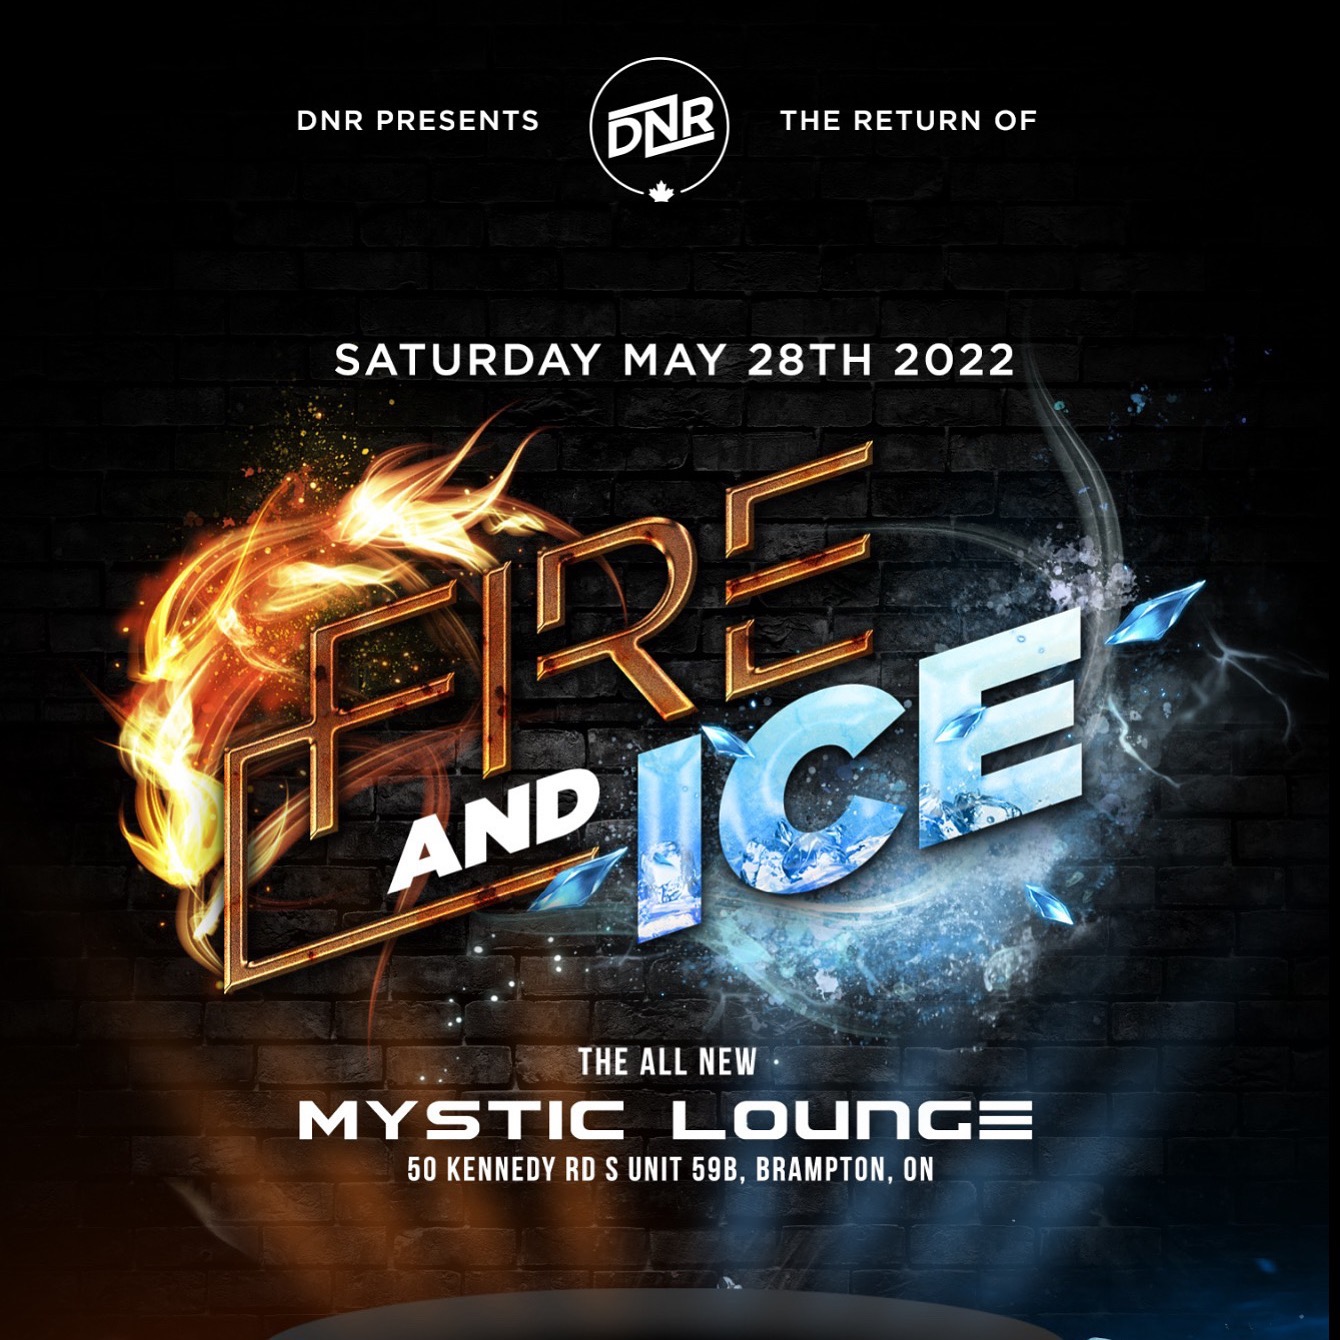 PAY AT THE DOOR! FIRE AND ICE 8.5